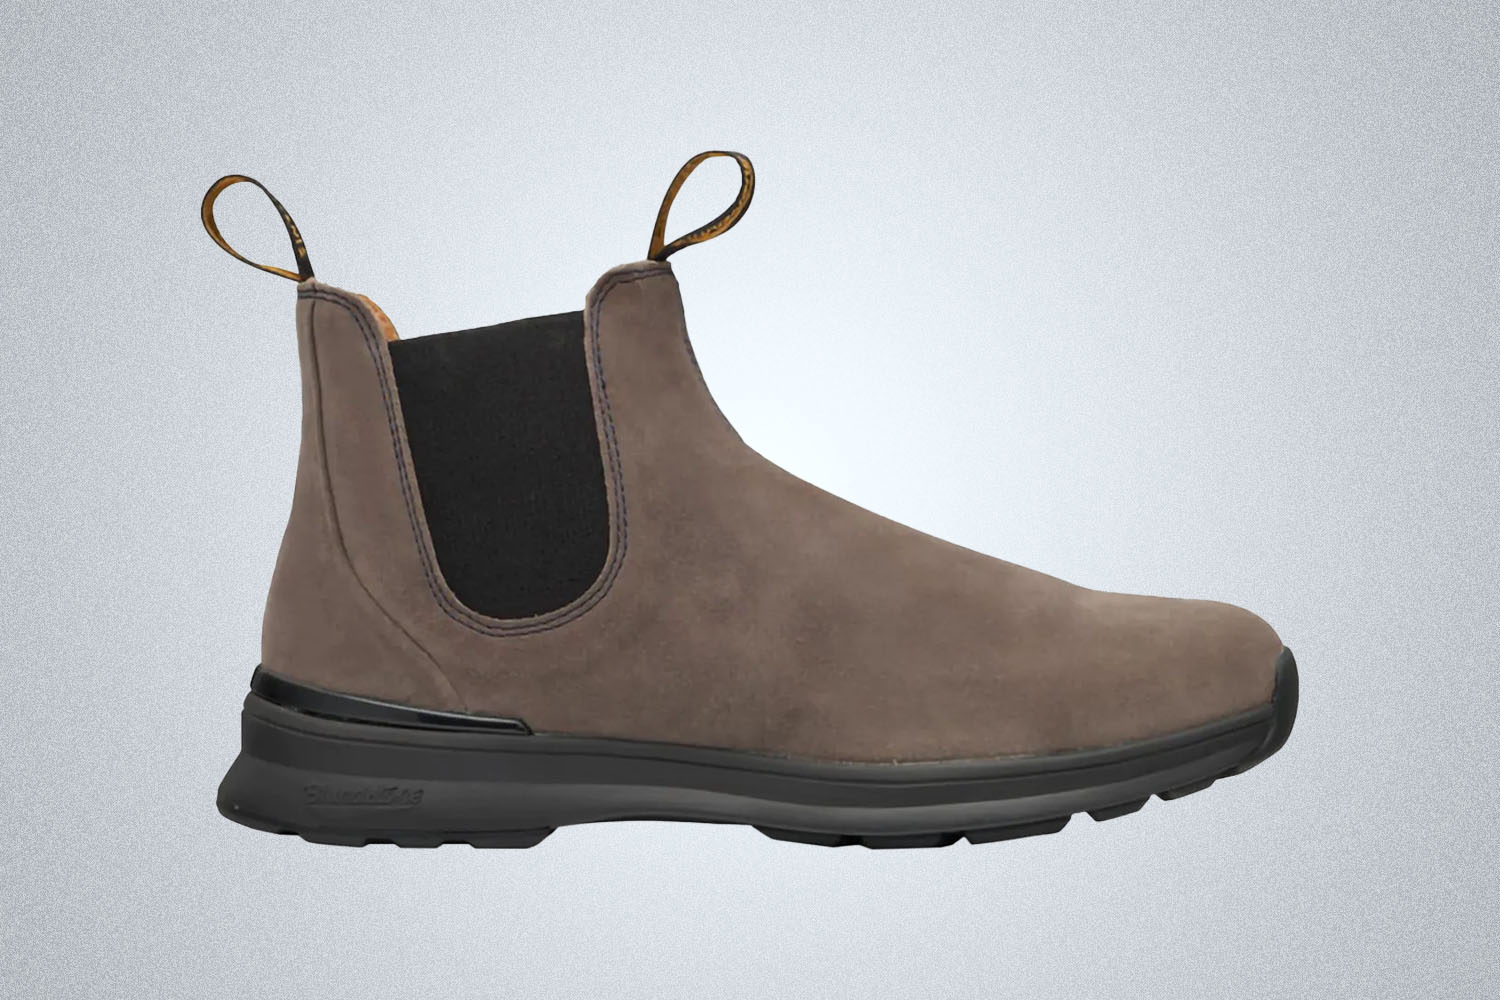 Do Blundstones Ever Go on Sale?